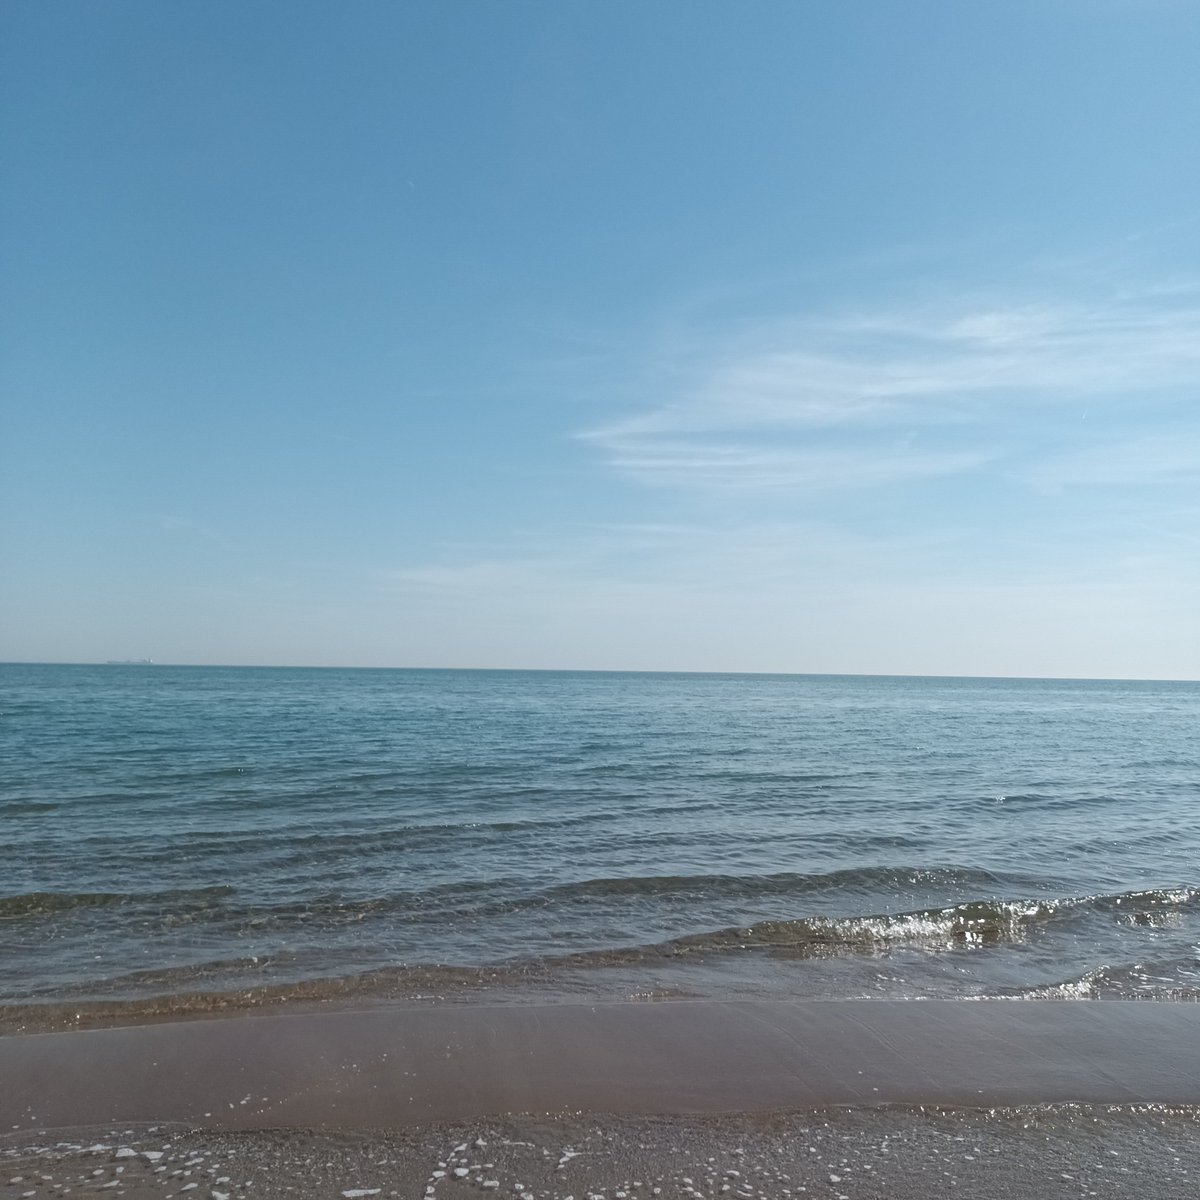 This year our first time on the beach is in April because of this hot off season (30°C). The water was still cold and it was a bit windy but it was nice to take a walk on the beach😊🏖🌊

#HeatWave #caldo #April13 #13aprile #beach #spiaggia #sea #mare